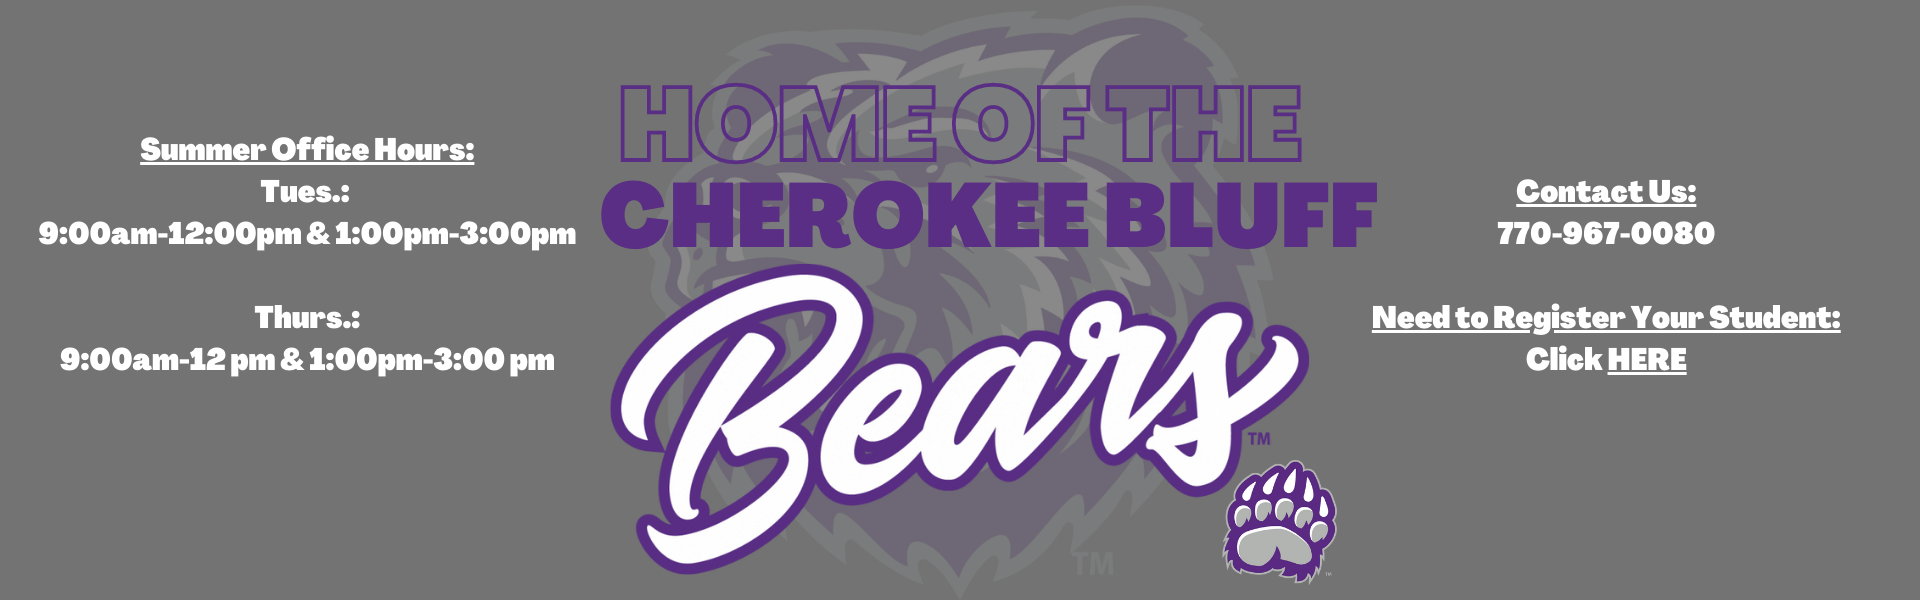 HOME OF THE CHEROKEE BLUFF BEARS (1000 × 250 px) (2)